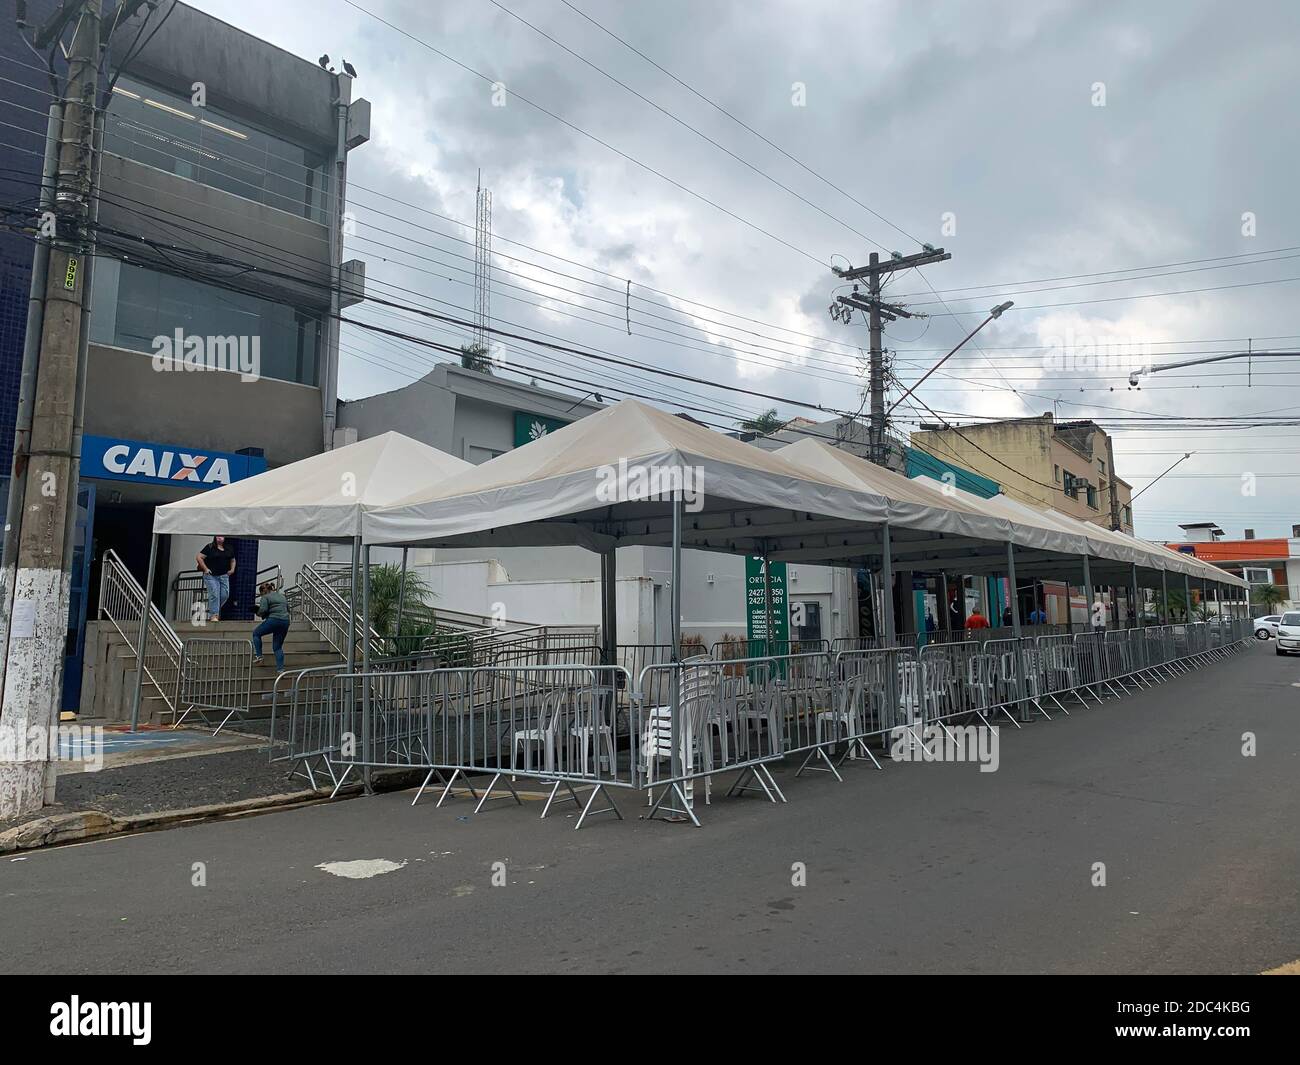 November 17, 2020. Atibaia, SP, Brazil. Metal structure with cover mounted in front of the Caixa Economica federal bank, to welcome people in line wit Stock Photo